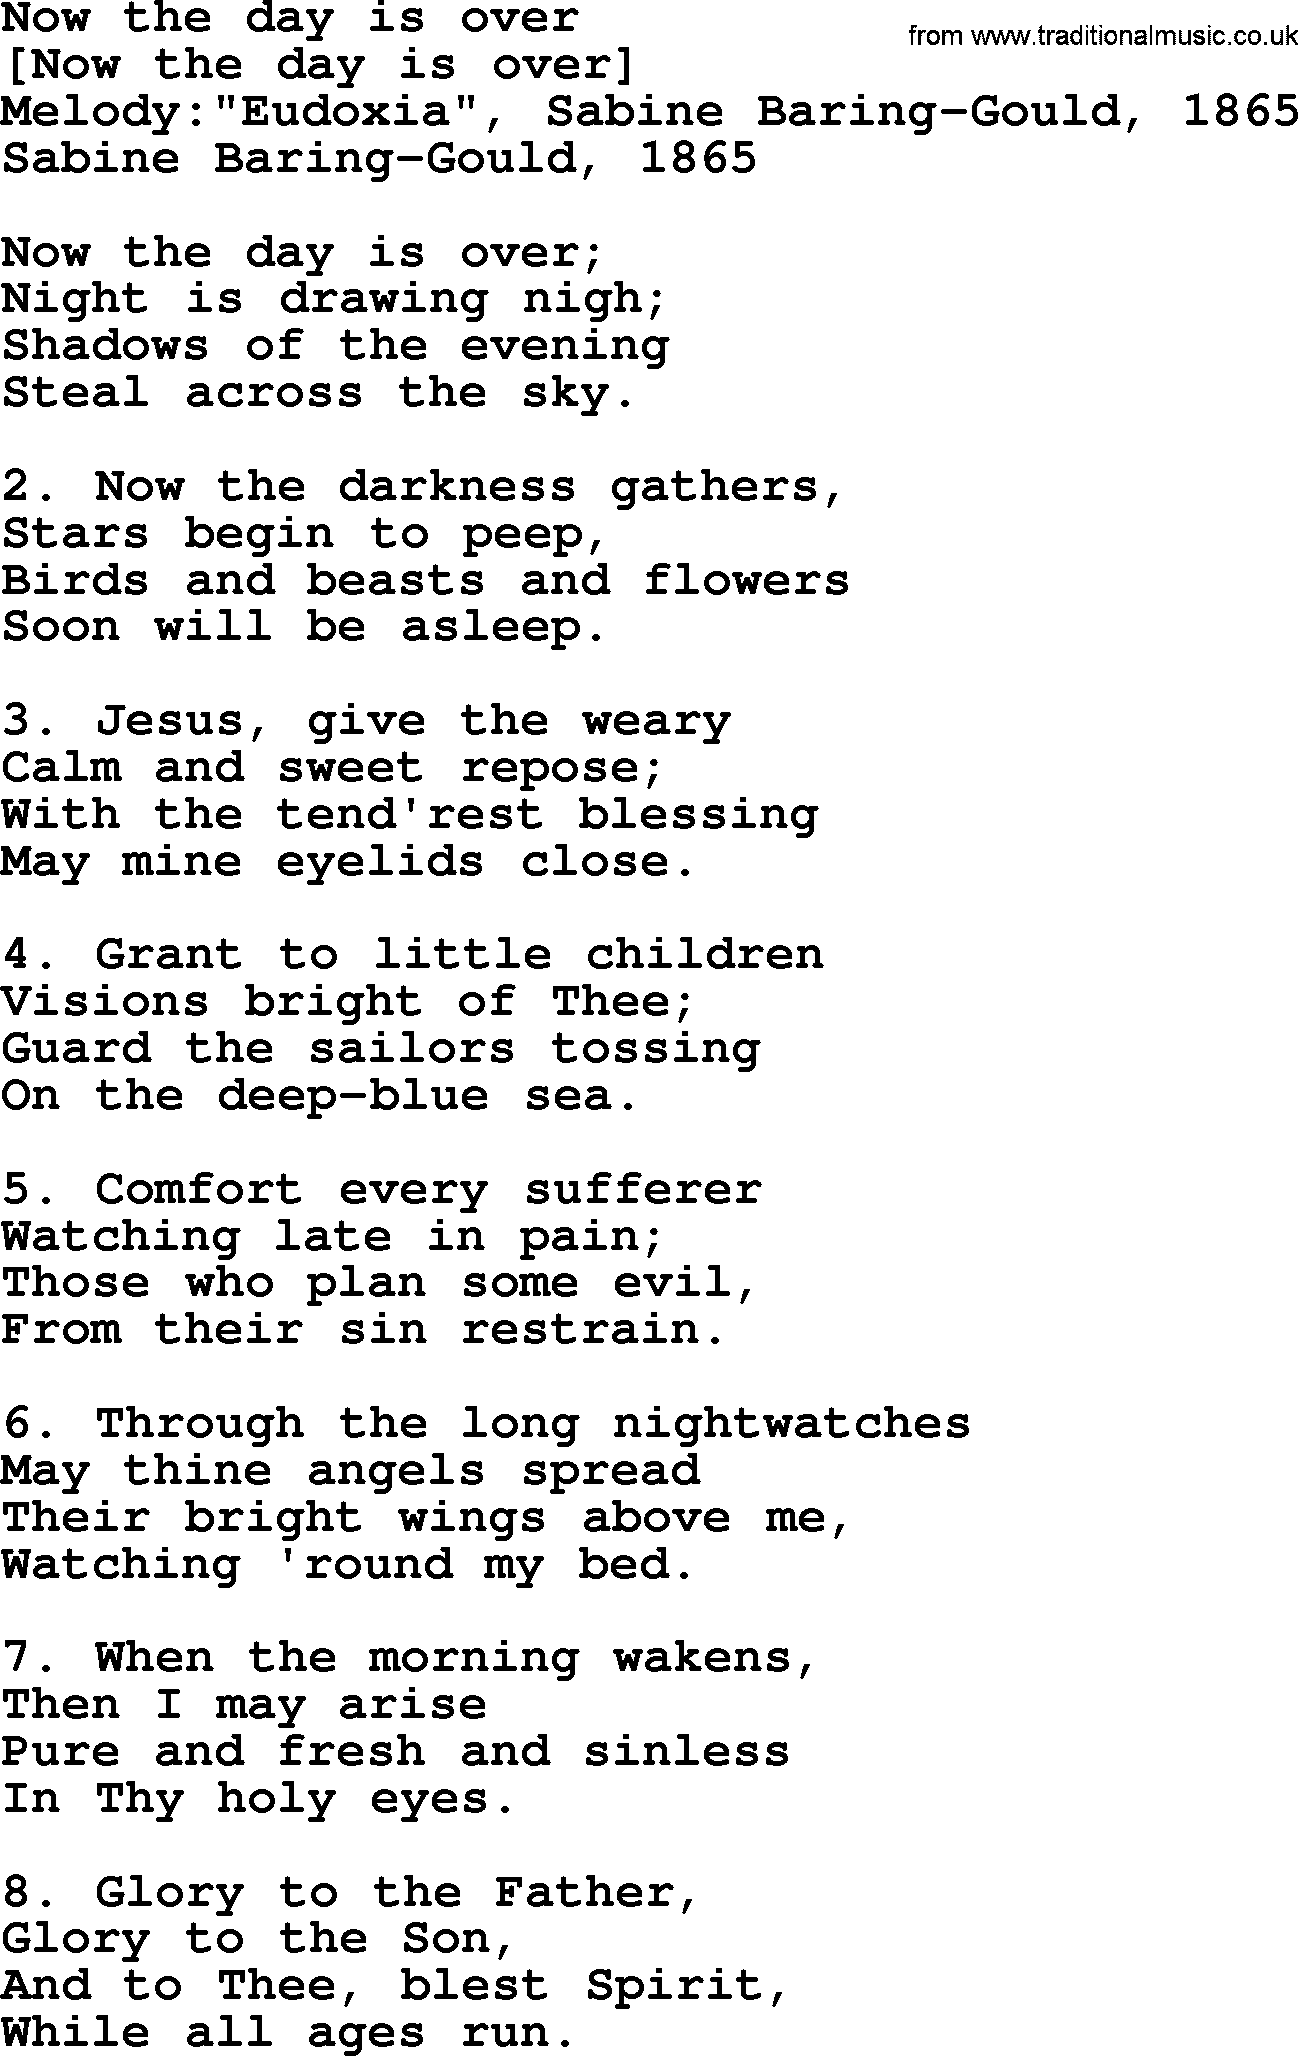 Old English Song: Now The Day Is Over lyrics